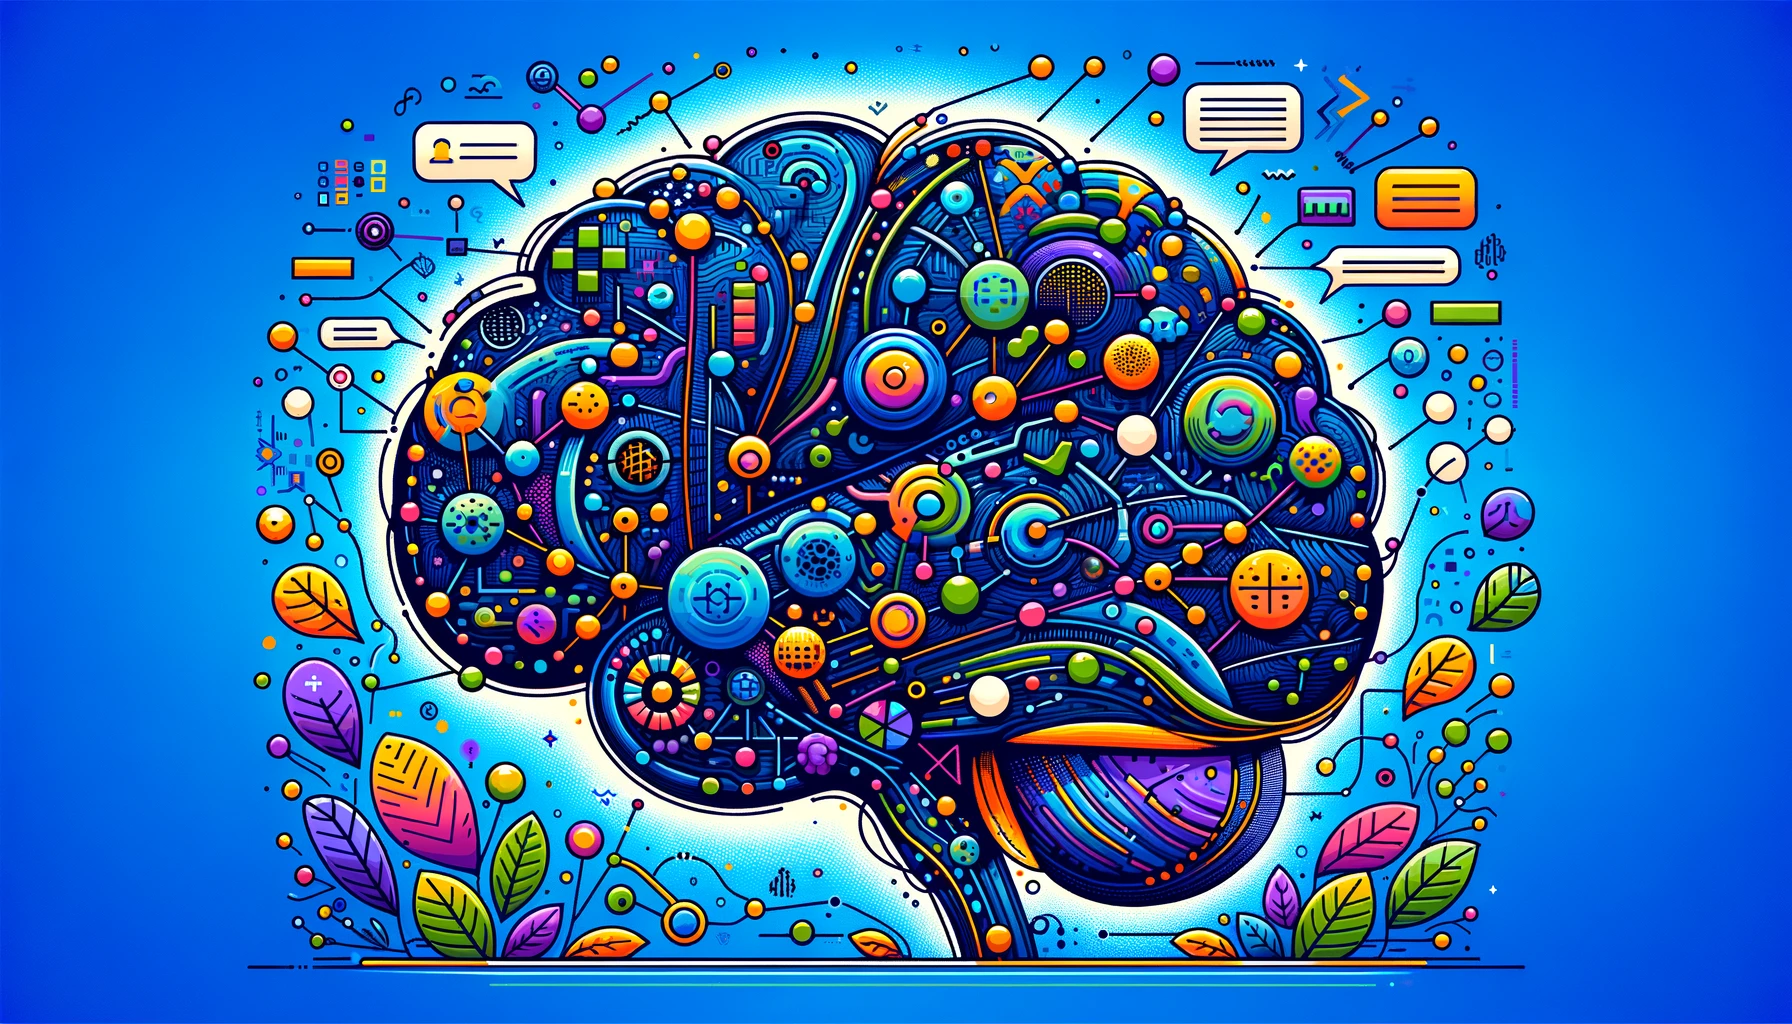 nlp featured image - a big brain and chat icons